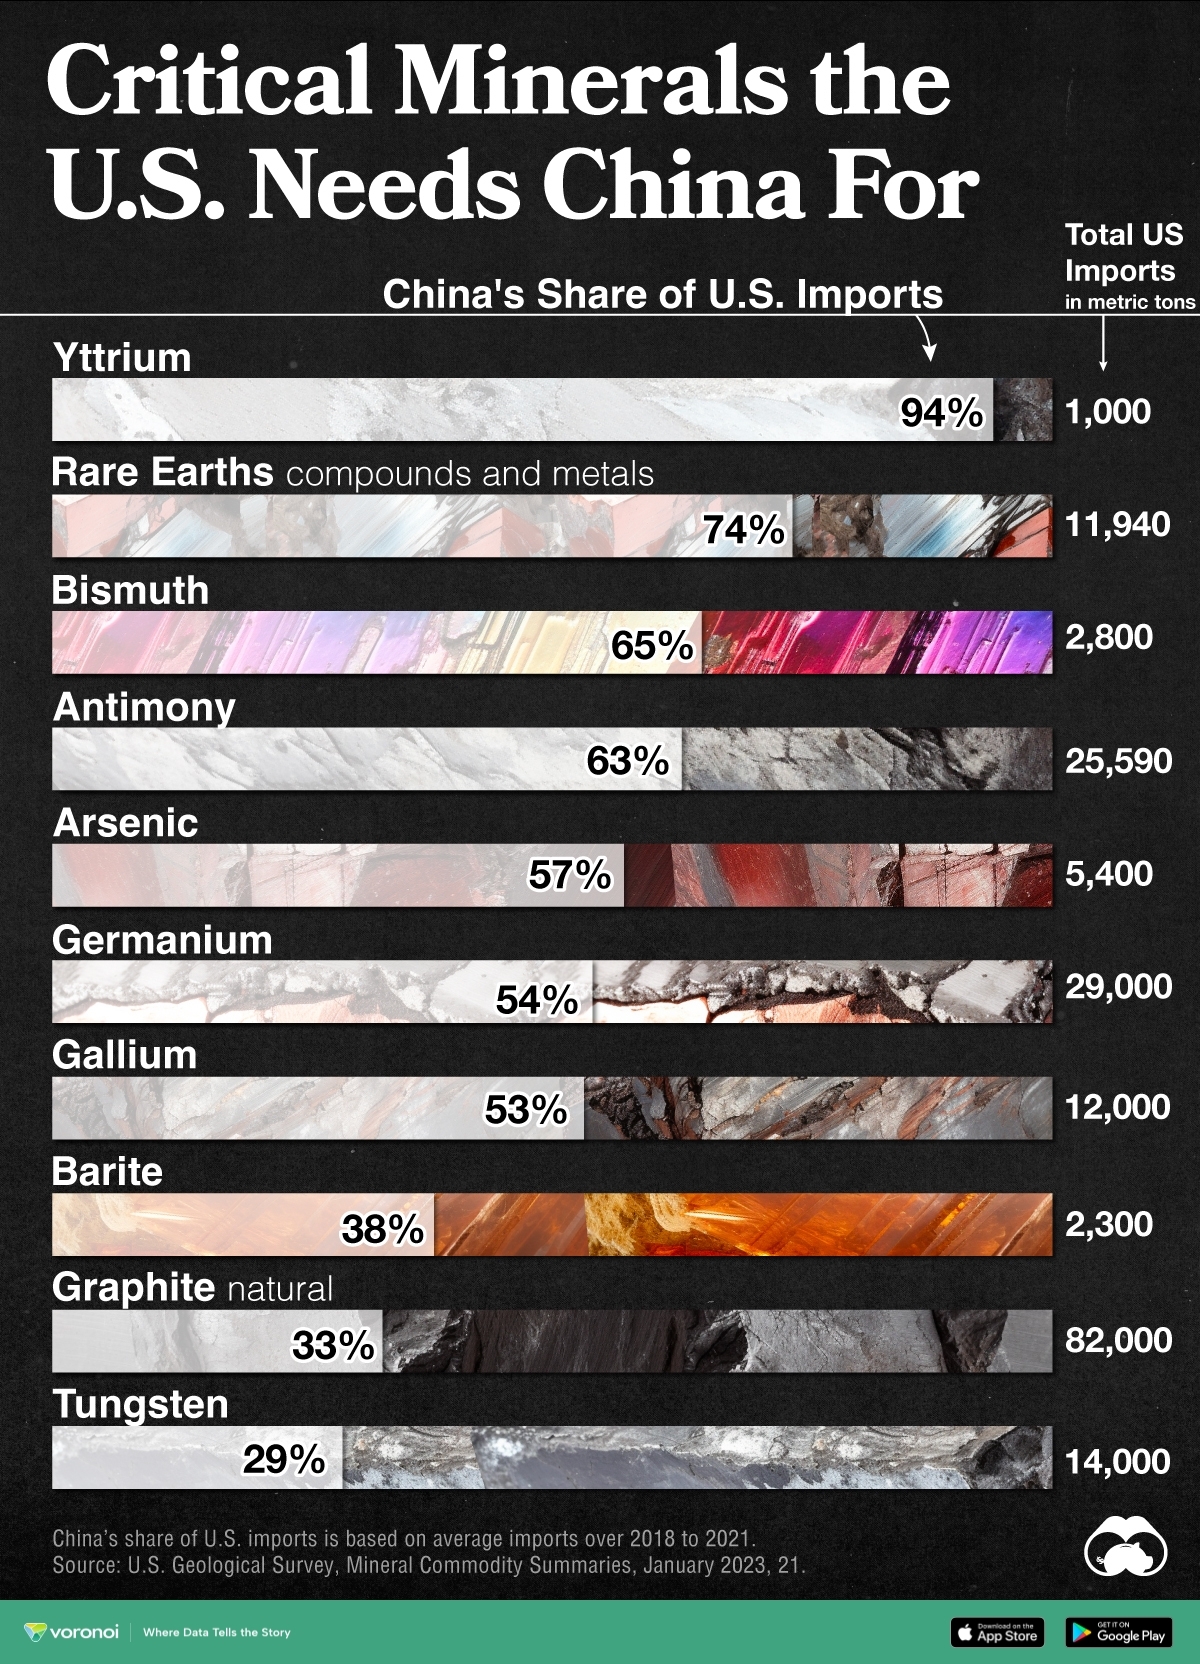 A bar chart showing China’s share of U.S. imports on the country's critical minerals list.